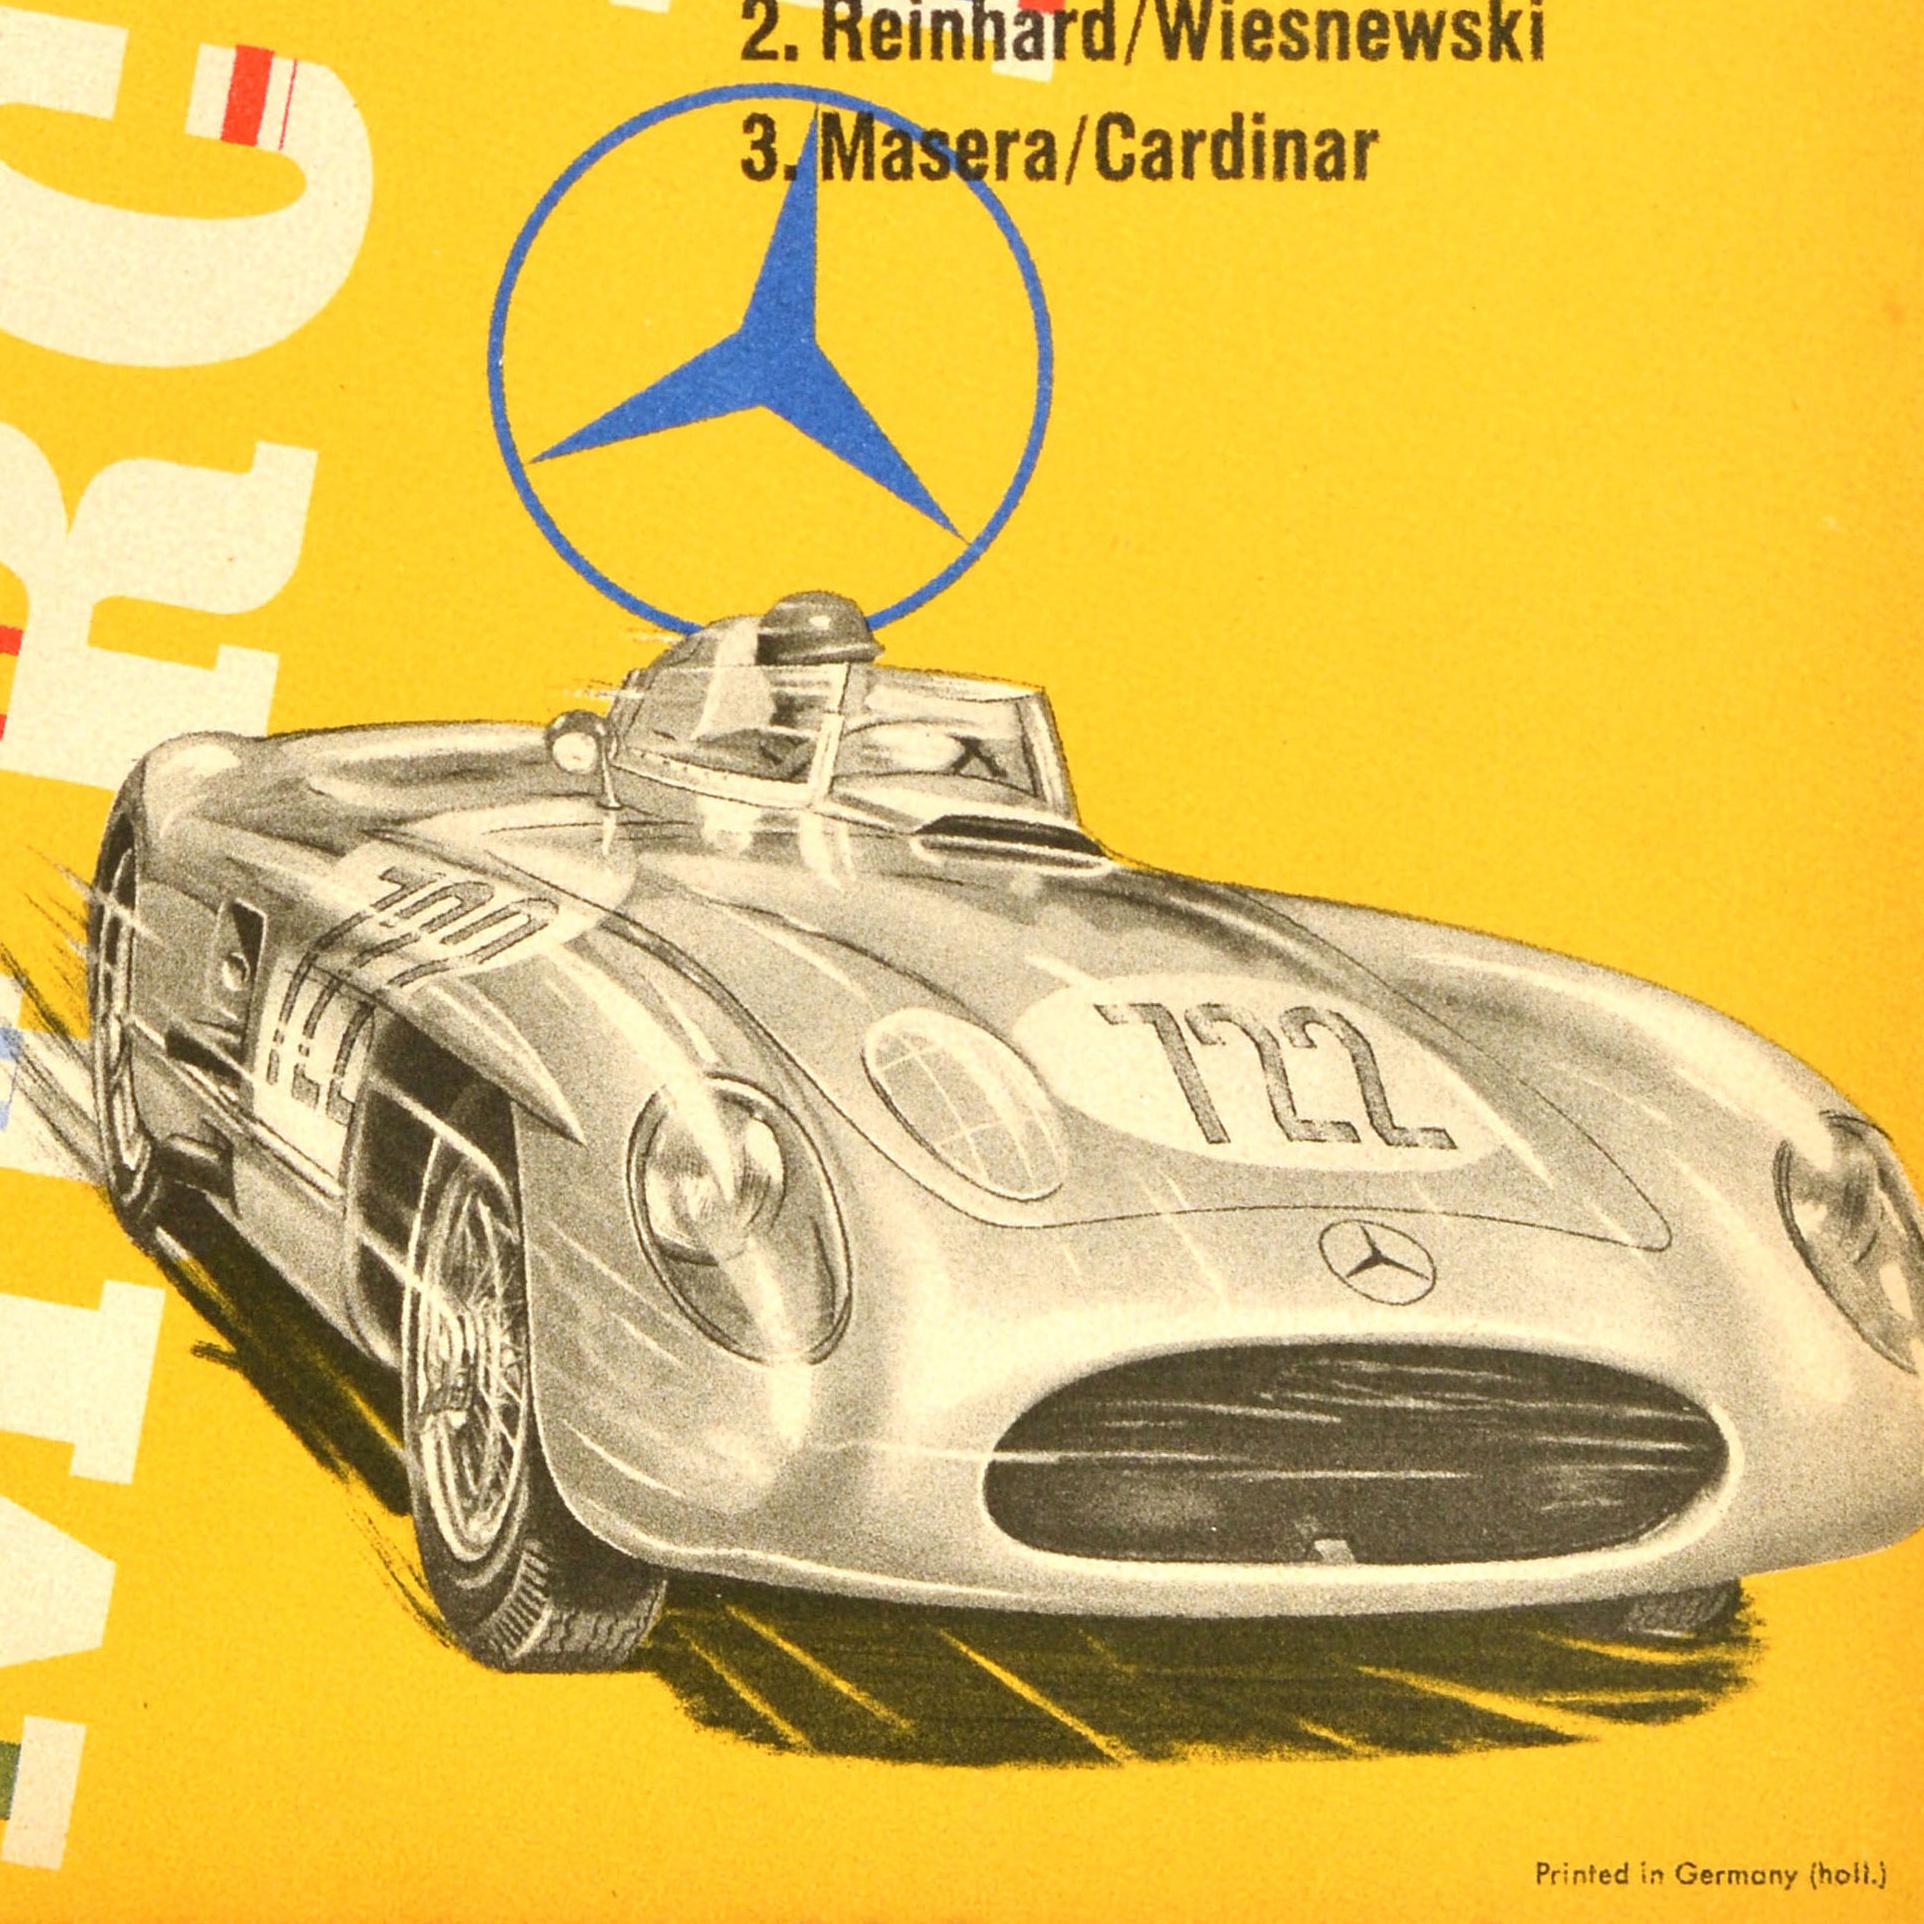 Original vintage car racing poster issued by Mercedes Benz to commemorate their victories at the XXII Mille Miglia races in 1955 with a list of the rankings: Racing sports cars / Race Sportswagens (300SLR) 1. Stirling Moss/Jenkinson 2. World